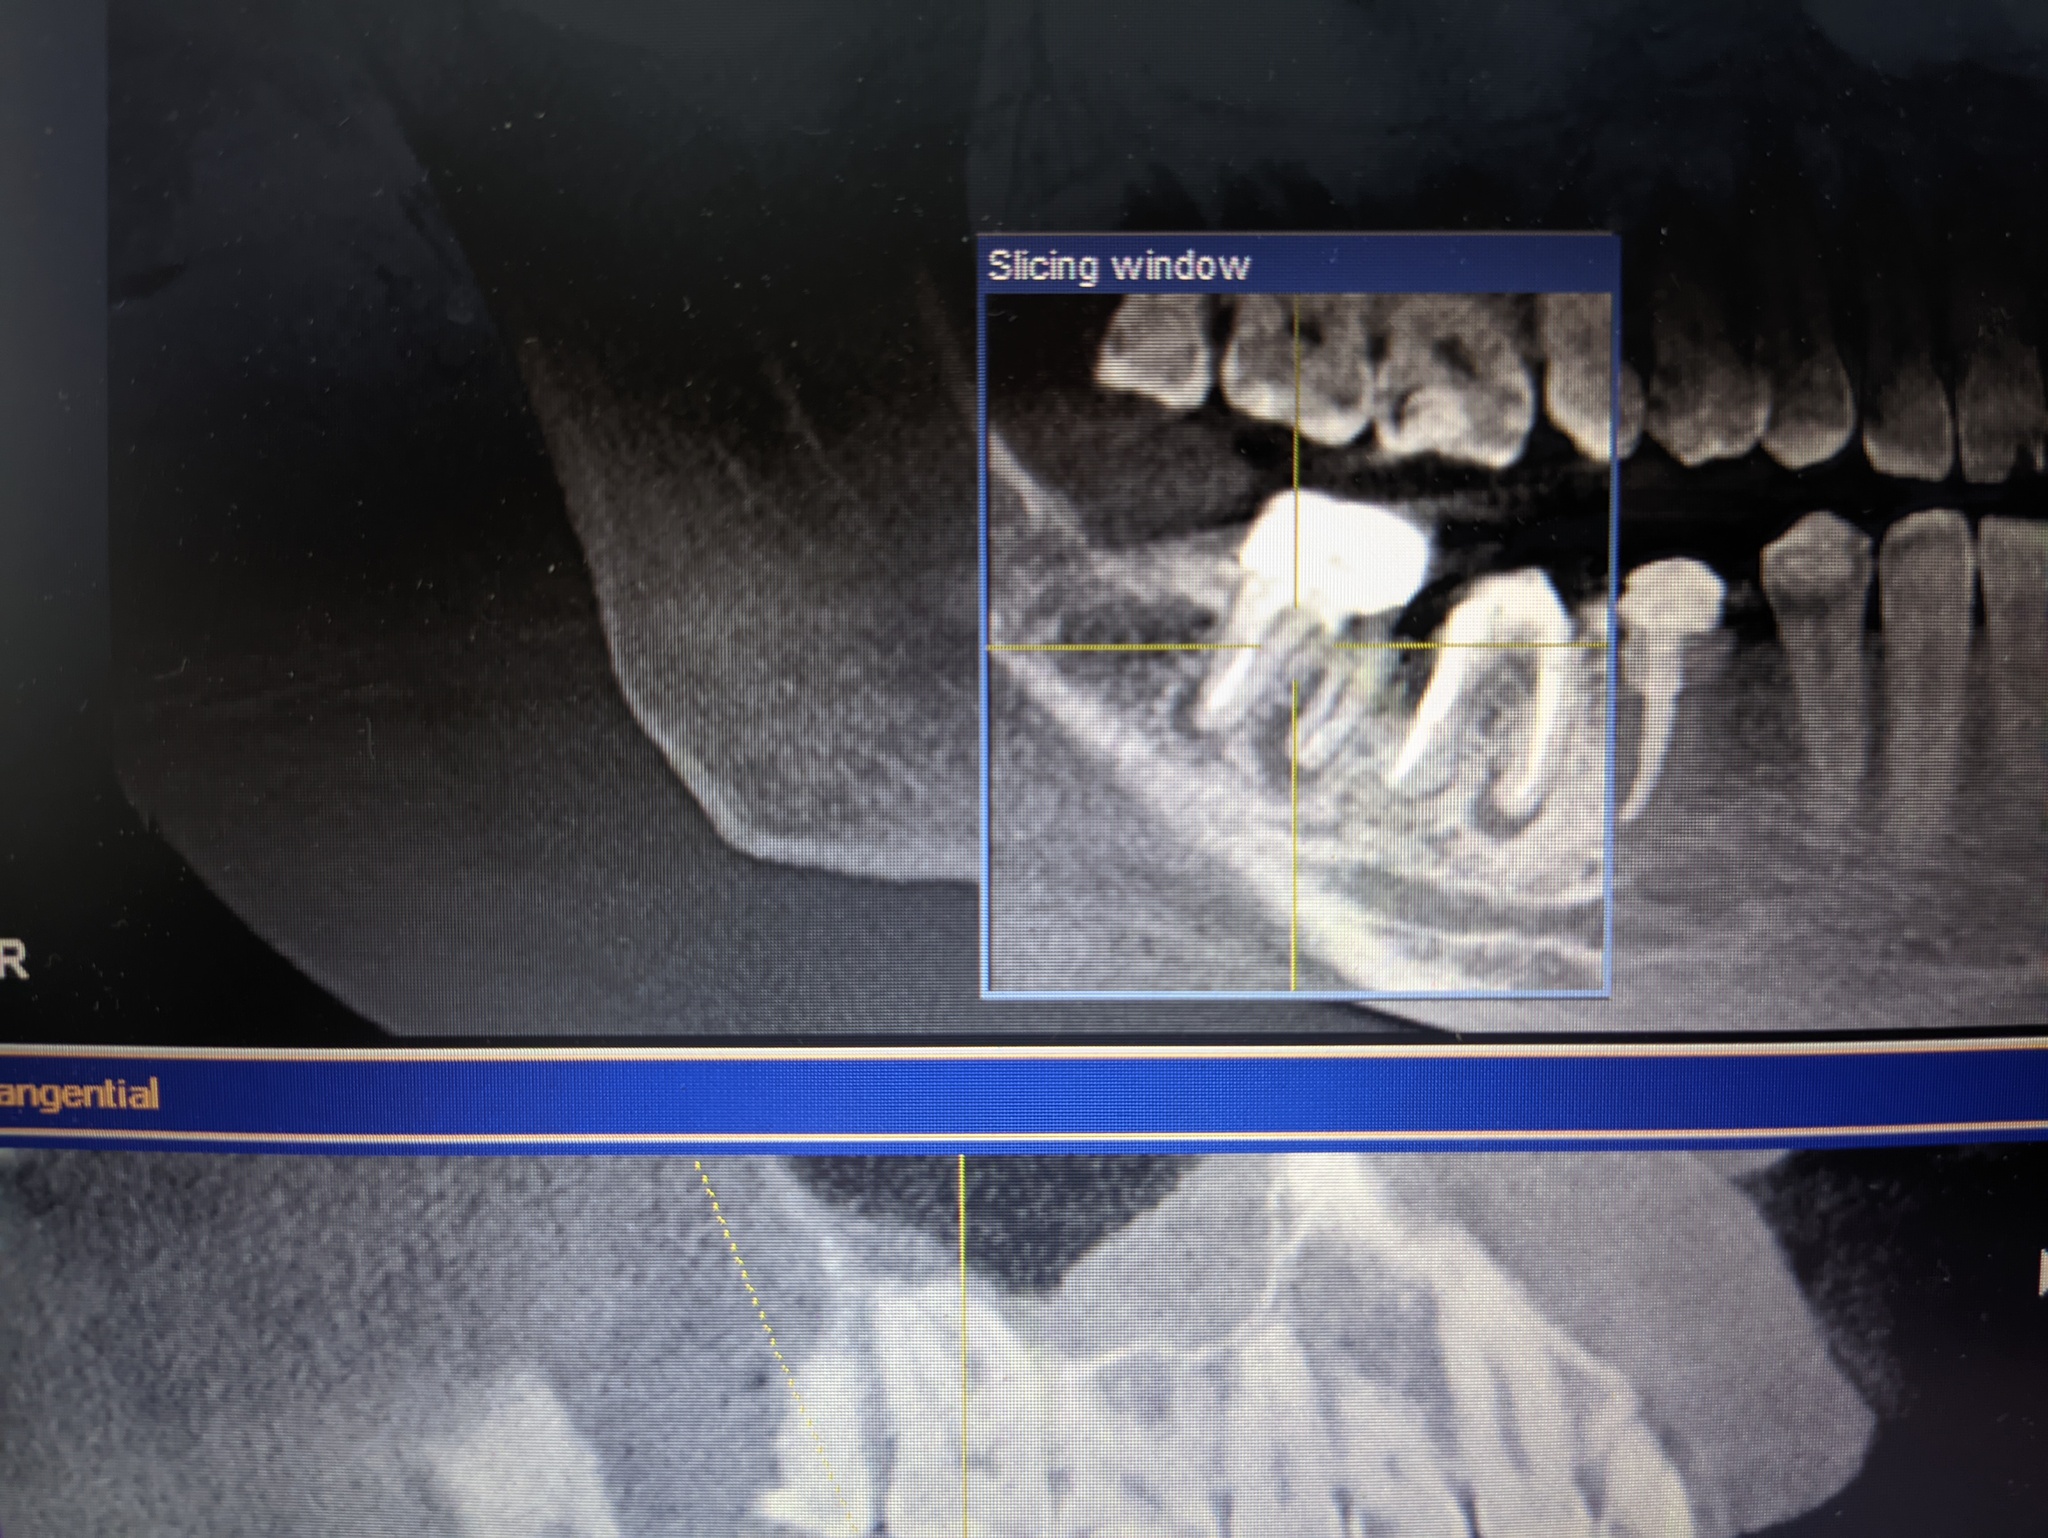 Tooth destruction due to improper treatment and implantation in another clinic - Dentistry, Dental implantation, Error, Orthopedics, CT, No rating